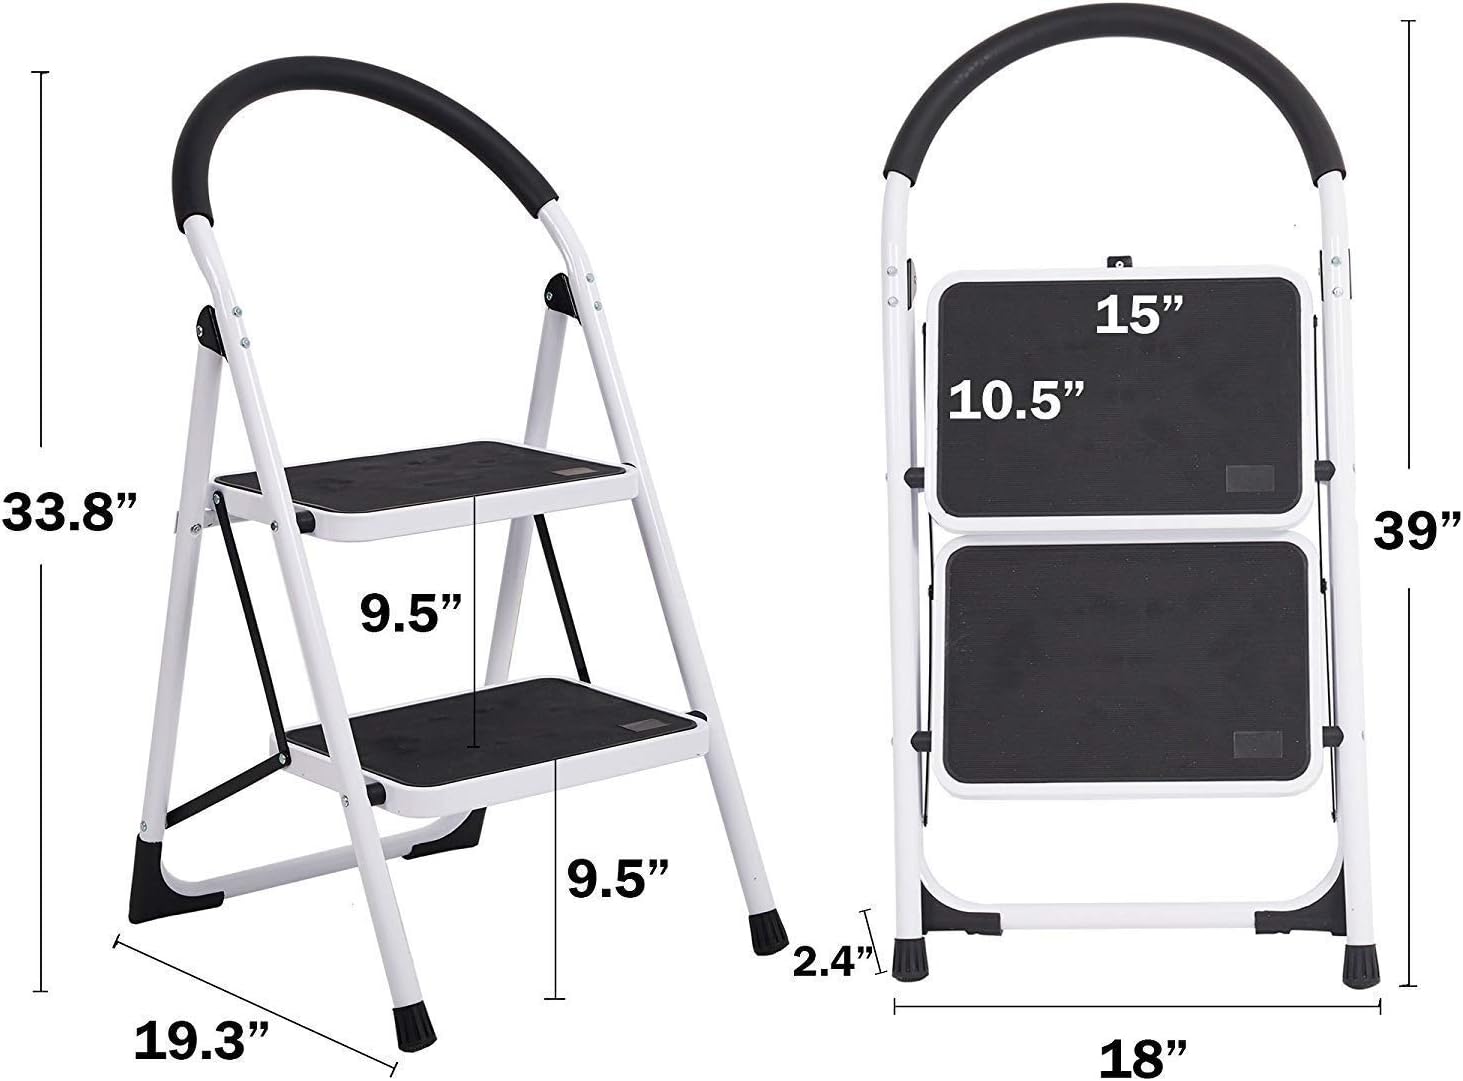 LUCKYERMORE 2 Step Ladder Folding Step Stool with Soft Grip Handle and Anti-Slip Wide Pedal, 330 lbs Capacity